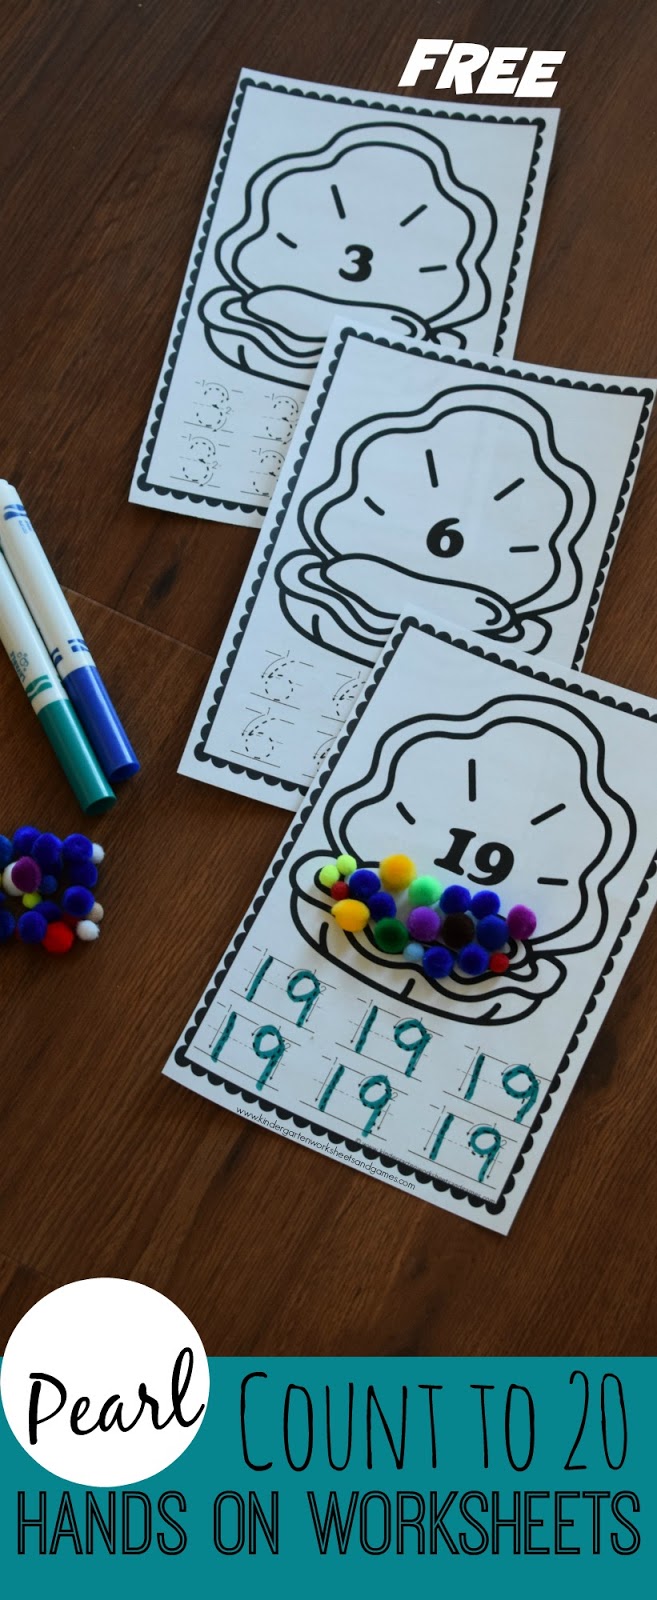 kindergarten-worksheets-and-games-free-pearl-count-to-20-hands-on